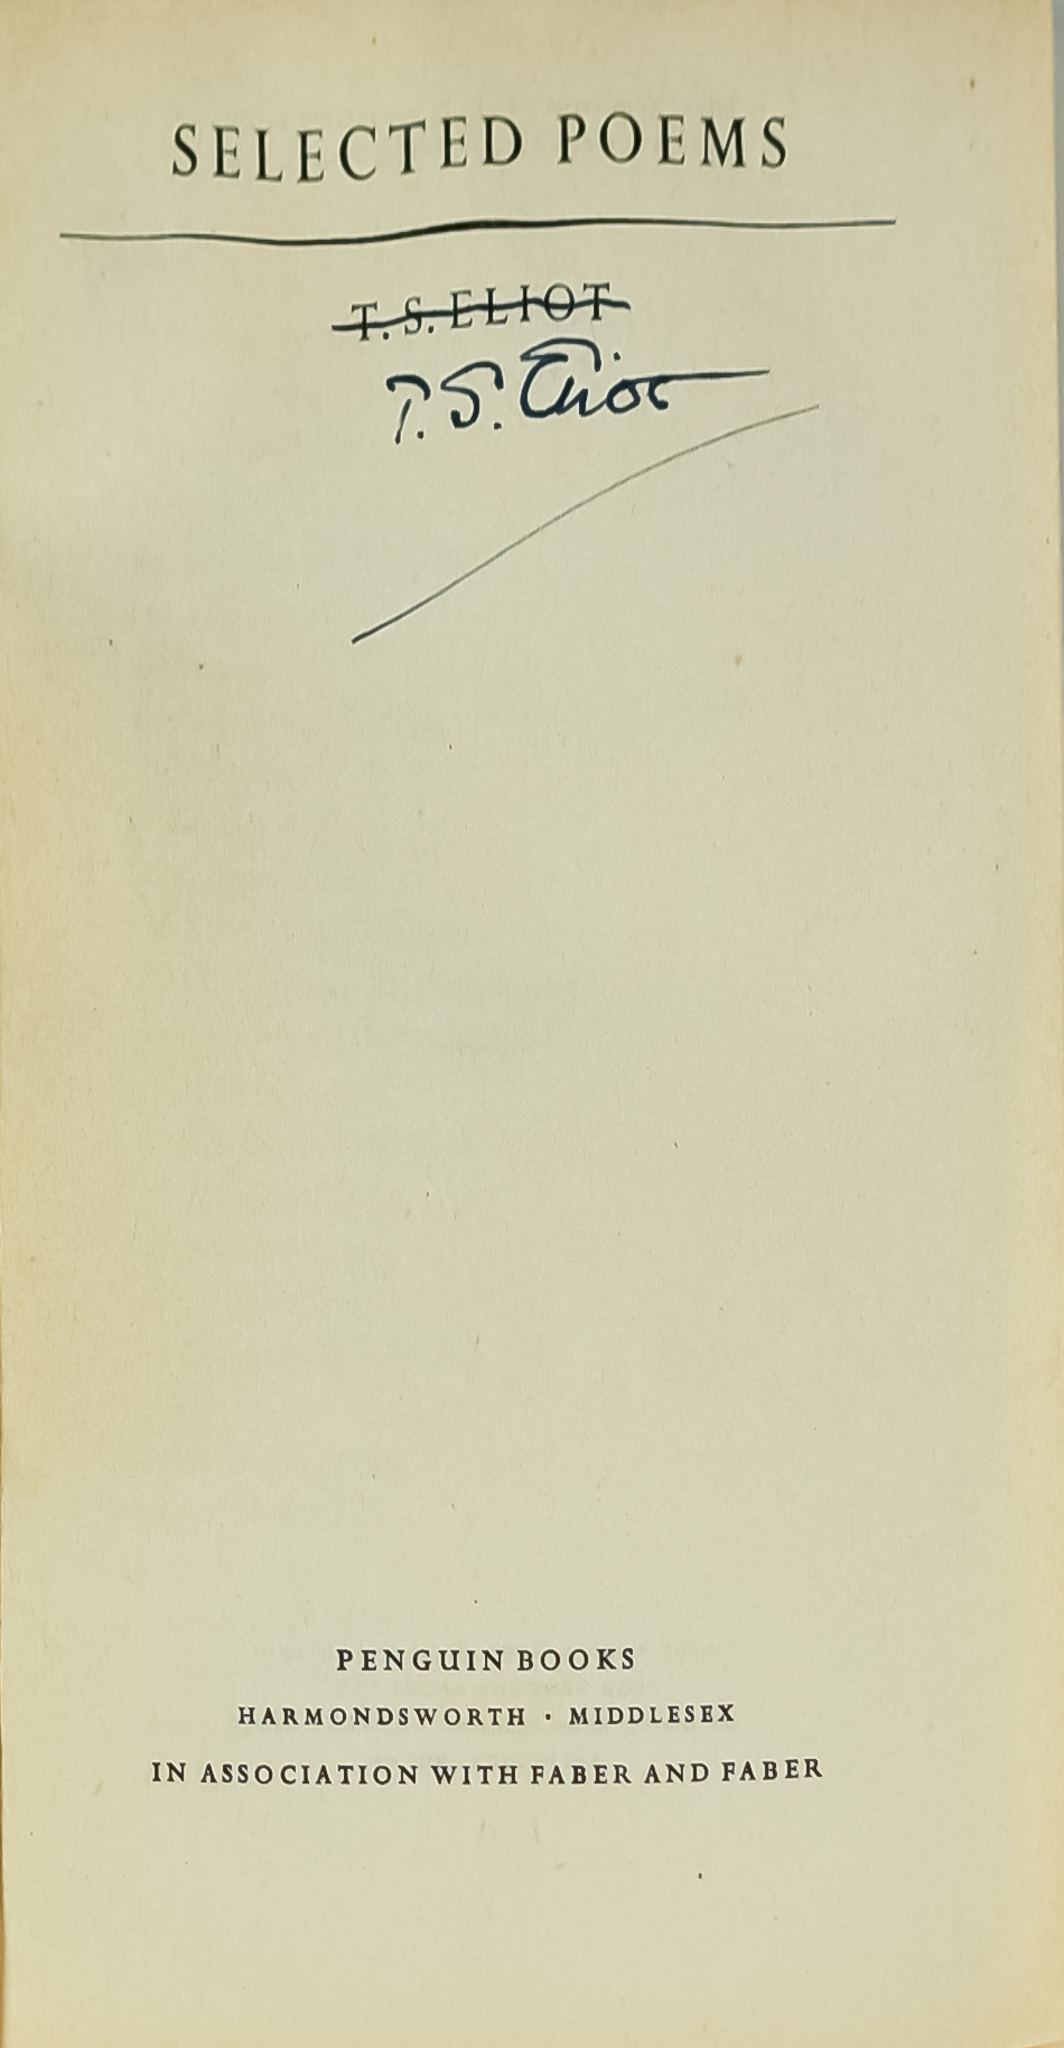 T. S. Eliot - "Selected Poems", published by Penguin Books, Harmondsworth, Middlesex, 1948, signed - Image 2 of 2